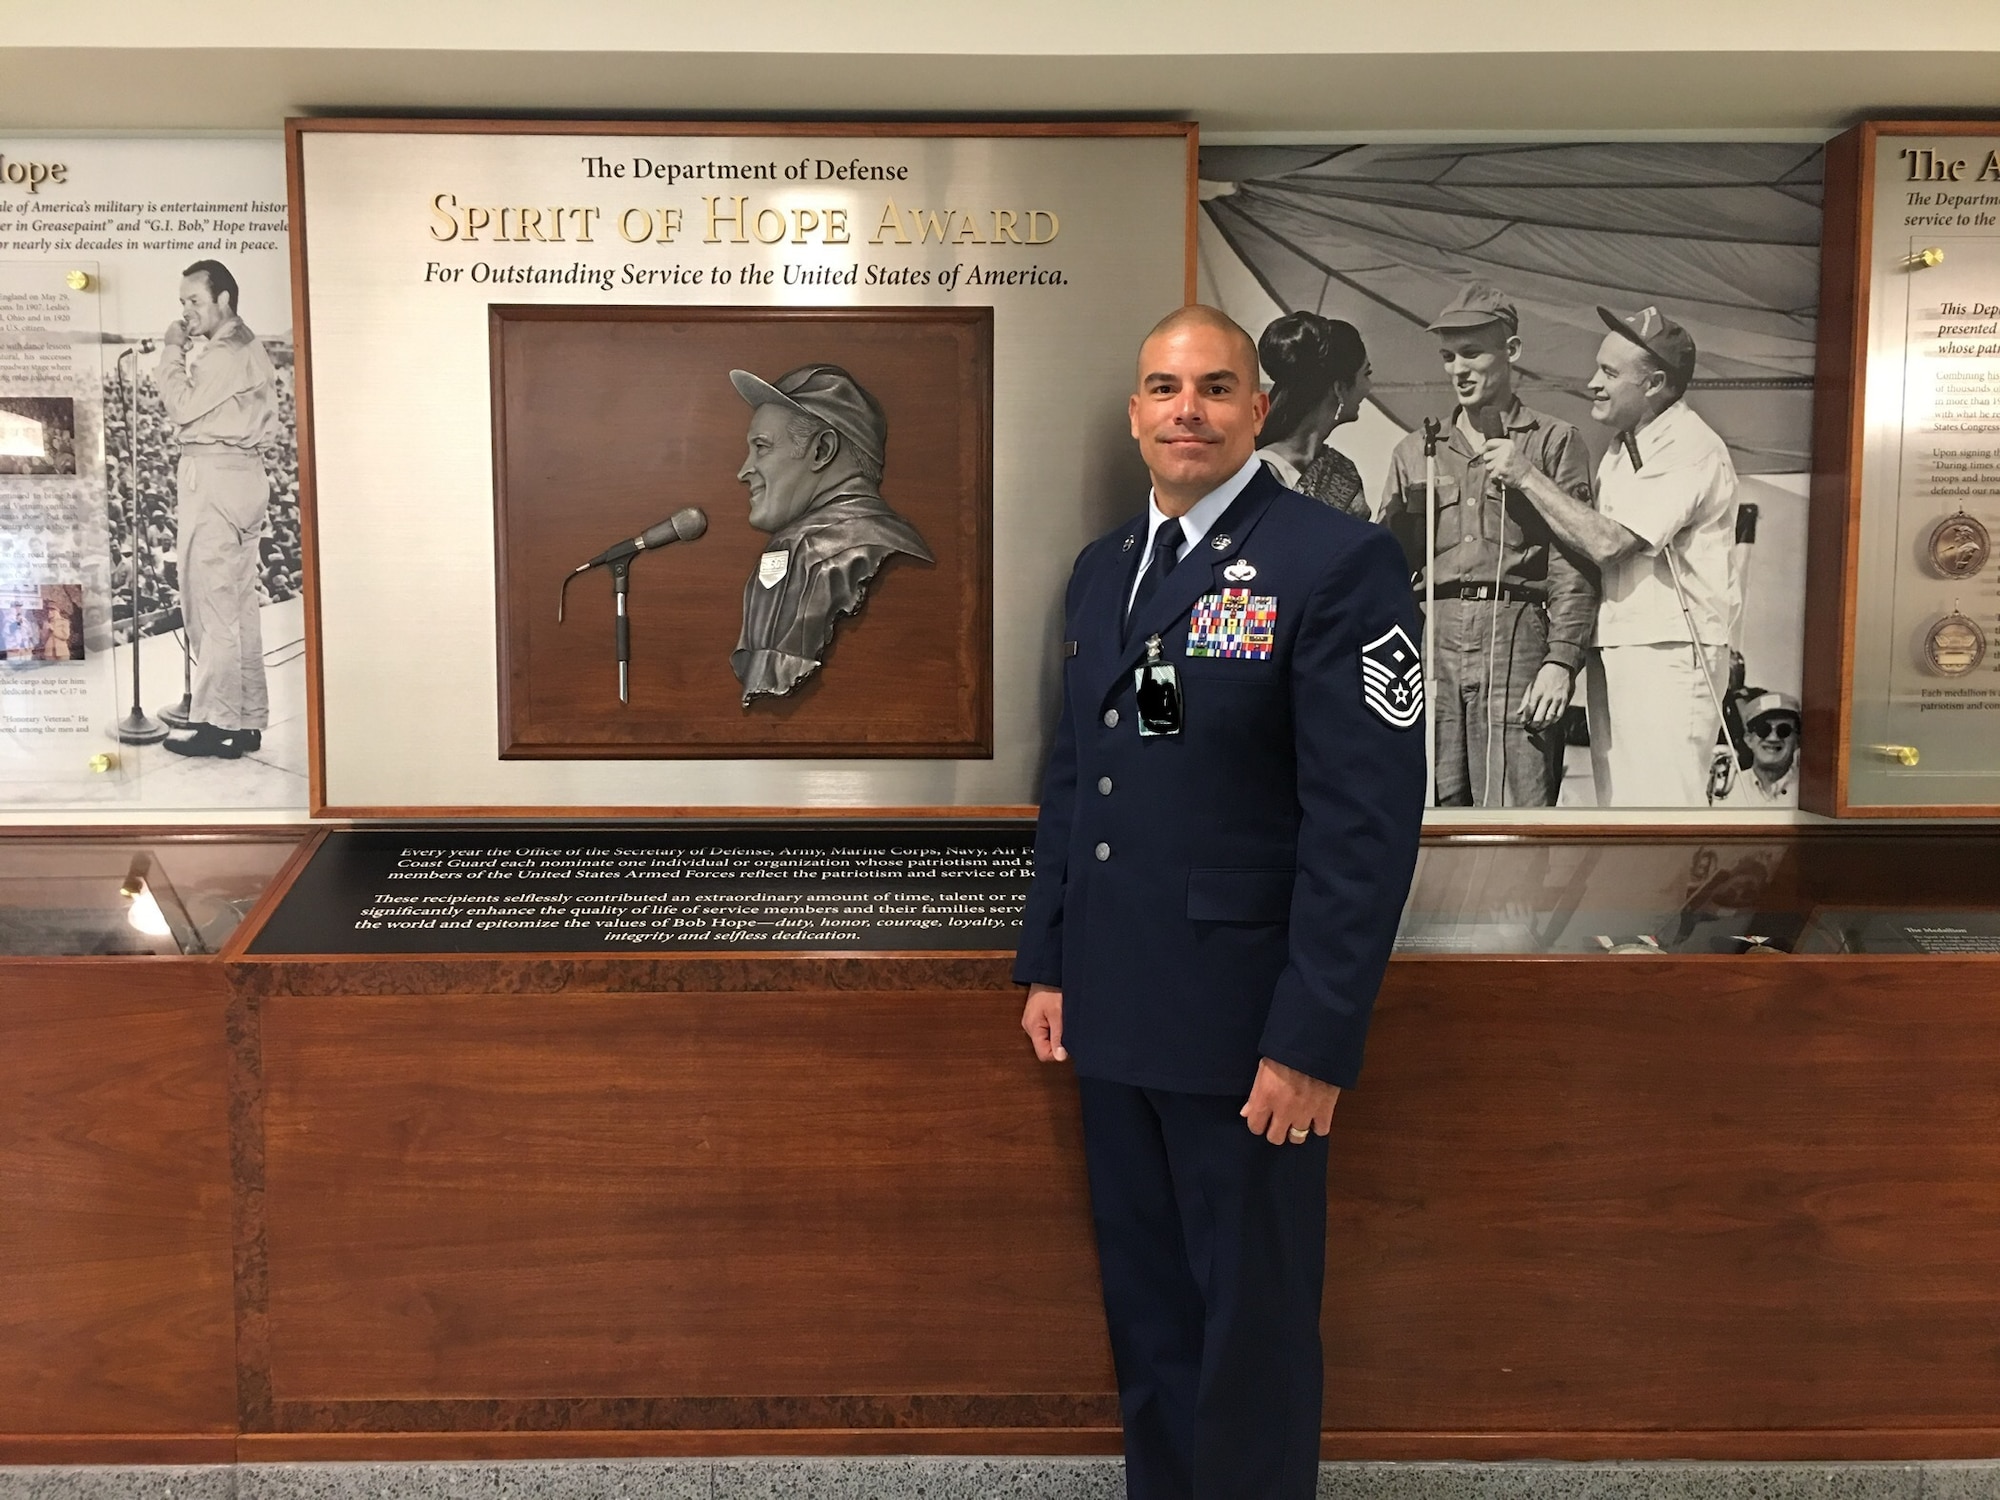 U.S. Air Force Master Sgt. Jorge L. Arce, 86th Aircraft Maintenance Squadron first sergeant, poses for a photo in front of the Bob Hope “Spirit of Hope” award wall at the Pentagon, Sept. 27, 2019. (Courtesy photo/Photo edited to black out security badges)